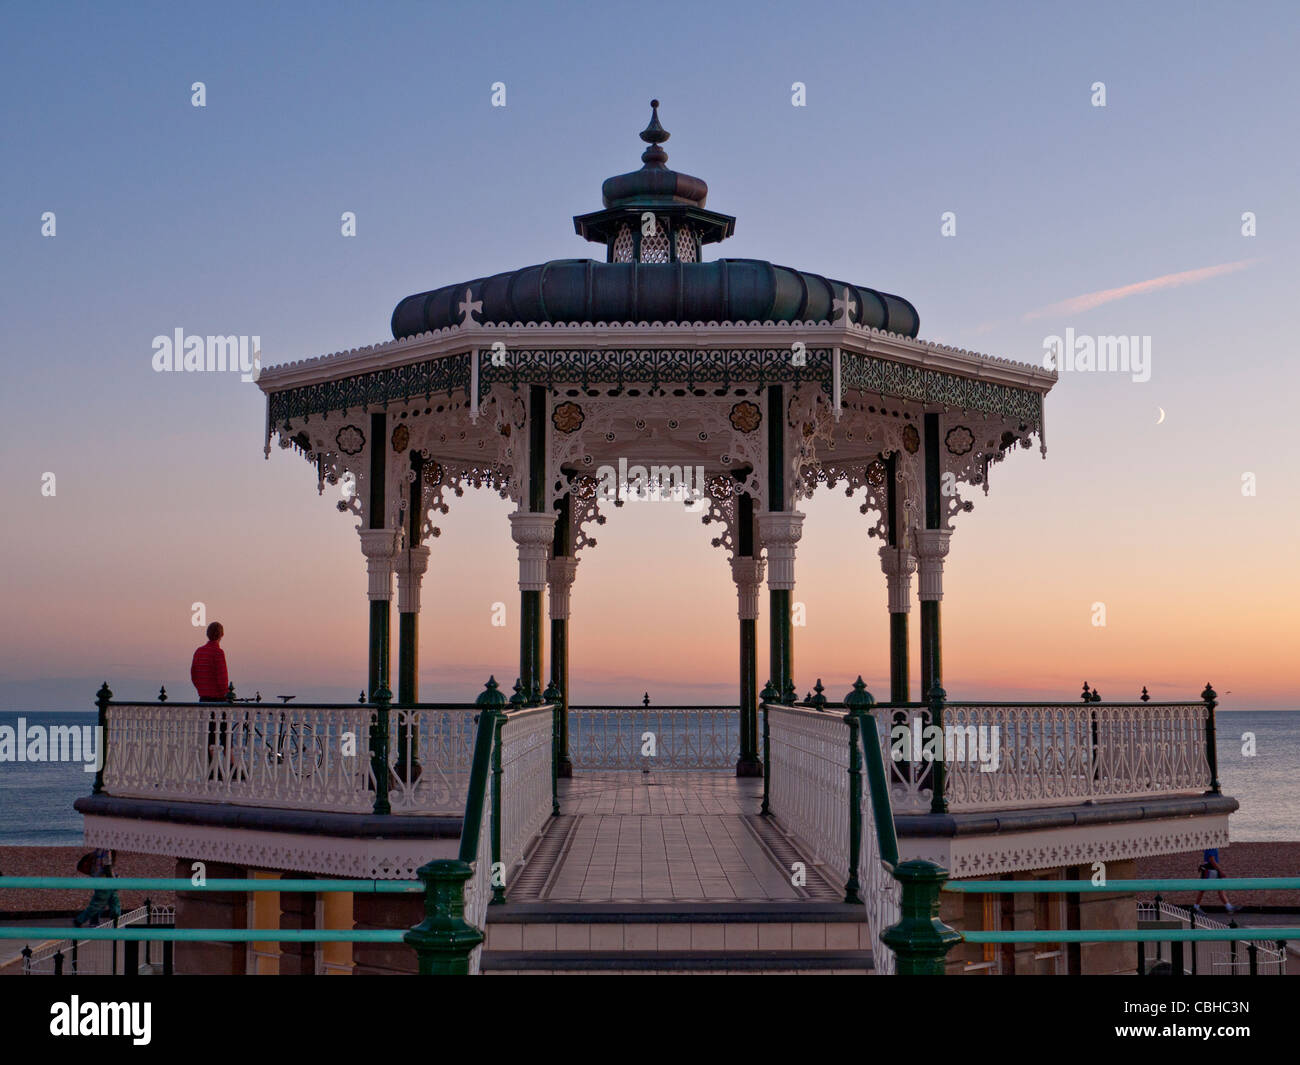 BRIGHTON Victorian Bandstand on the promenade at sunset with lone figure enjoying the wide seascape view Brighton Sussex UK Stock Photo